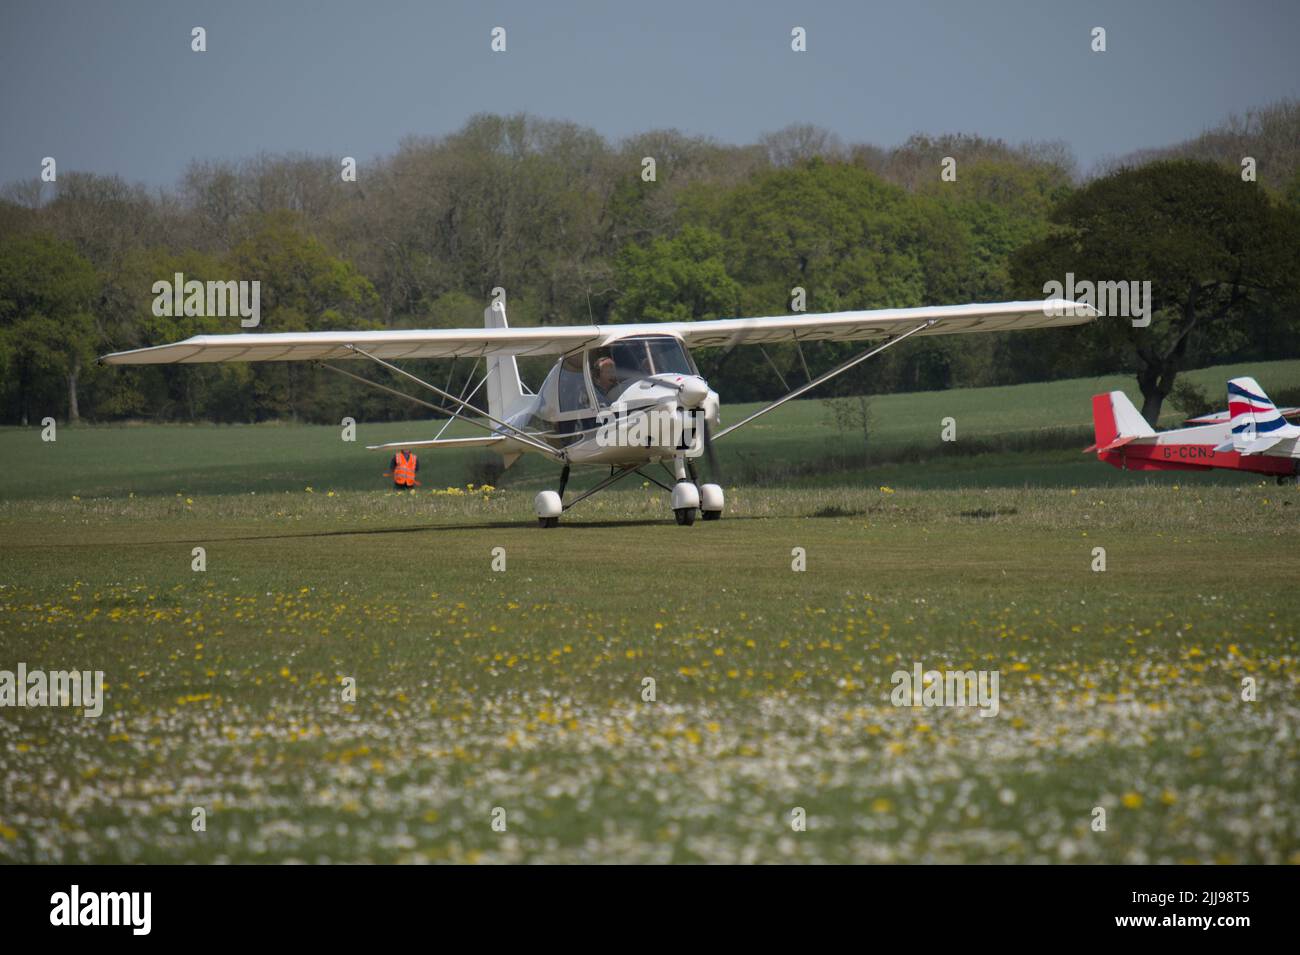 An Ikarus C42 light aircraft at Popham Airfield in Hampshire for the Microlight Trade Fair 2022 Stock Photo